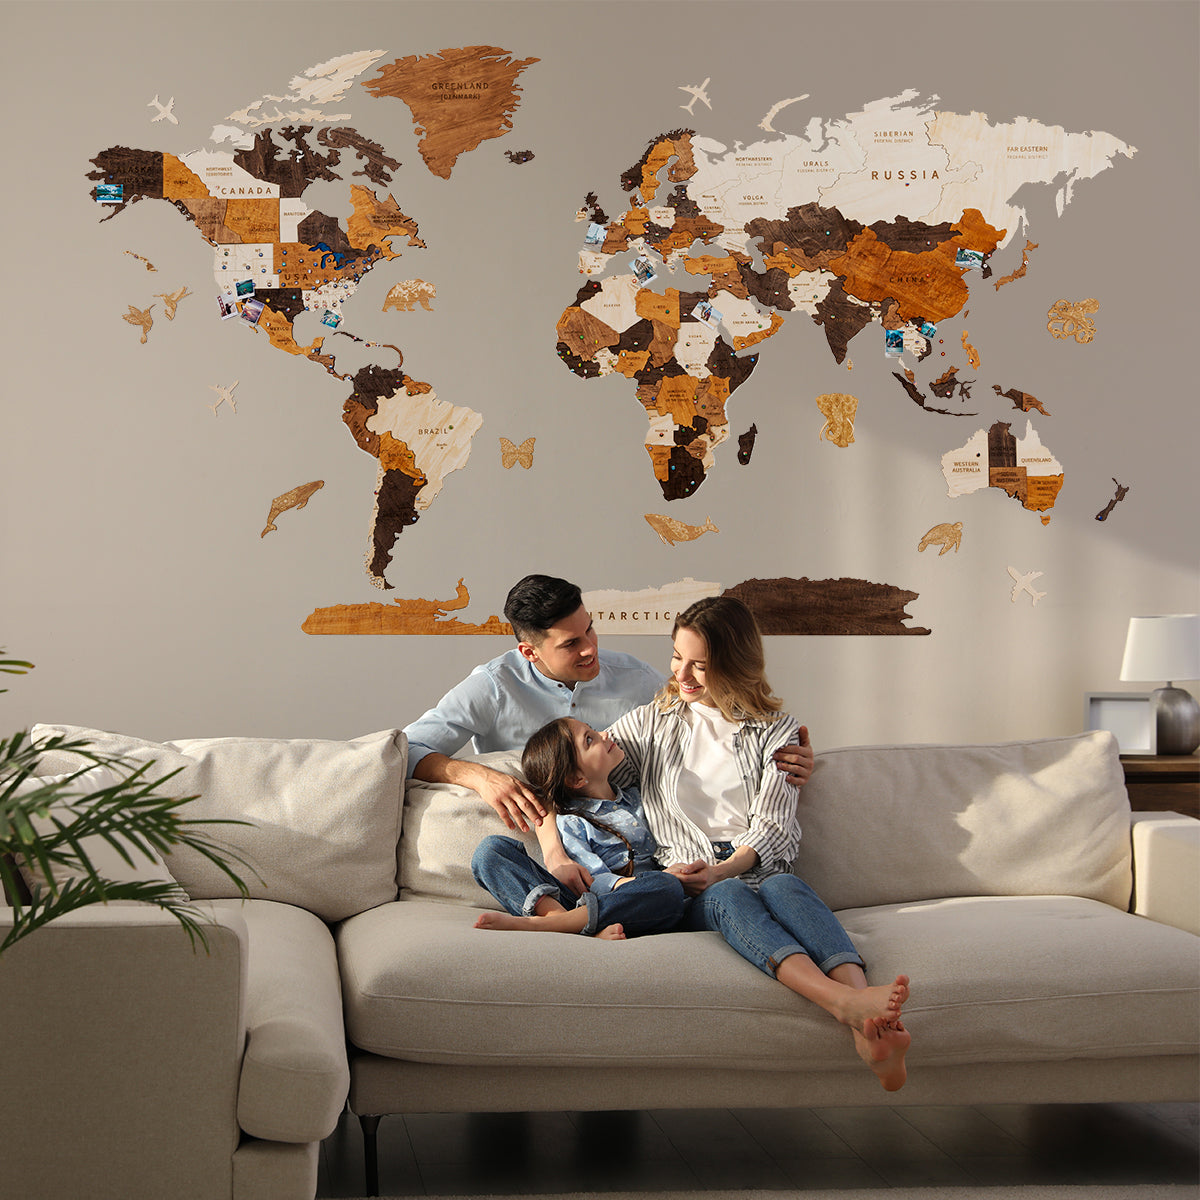 3D Wooden World Map with push pins